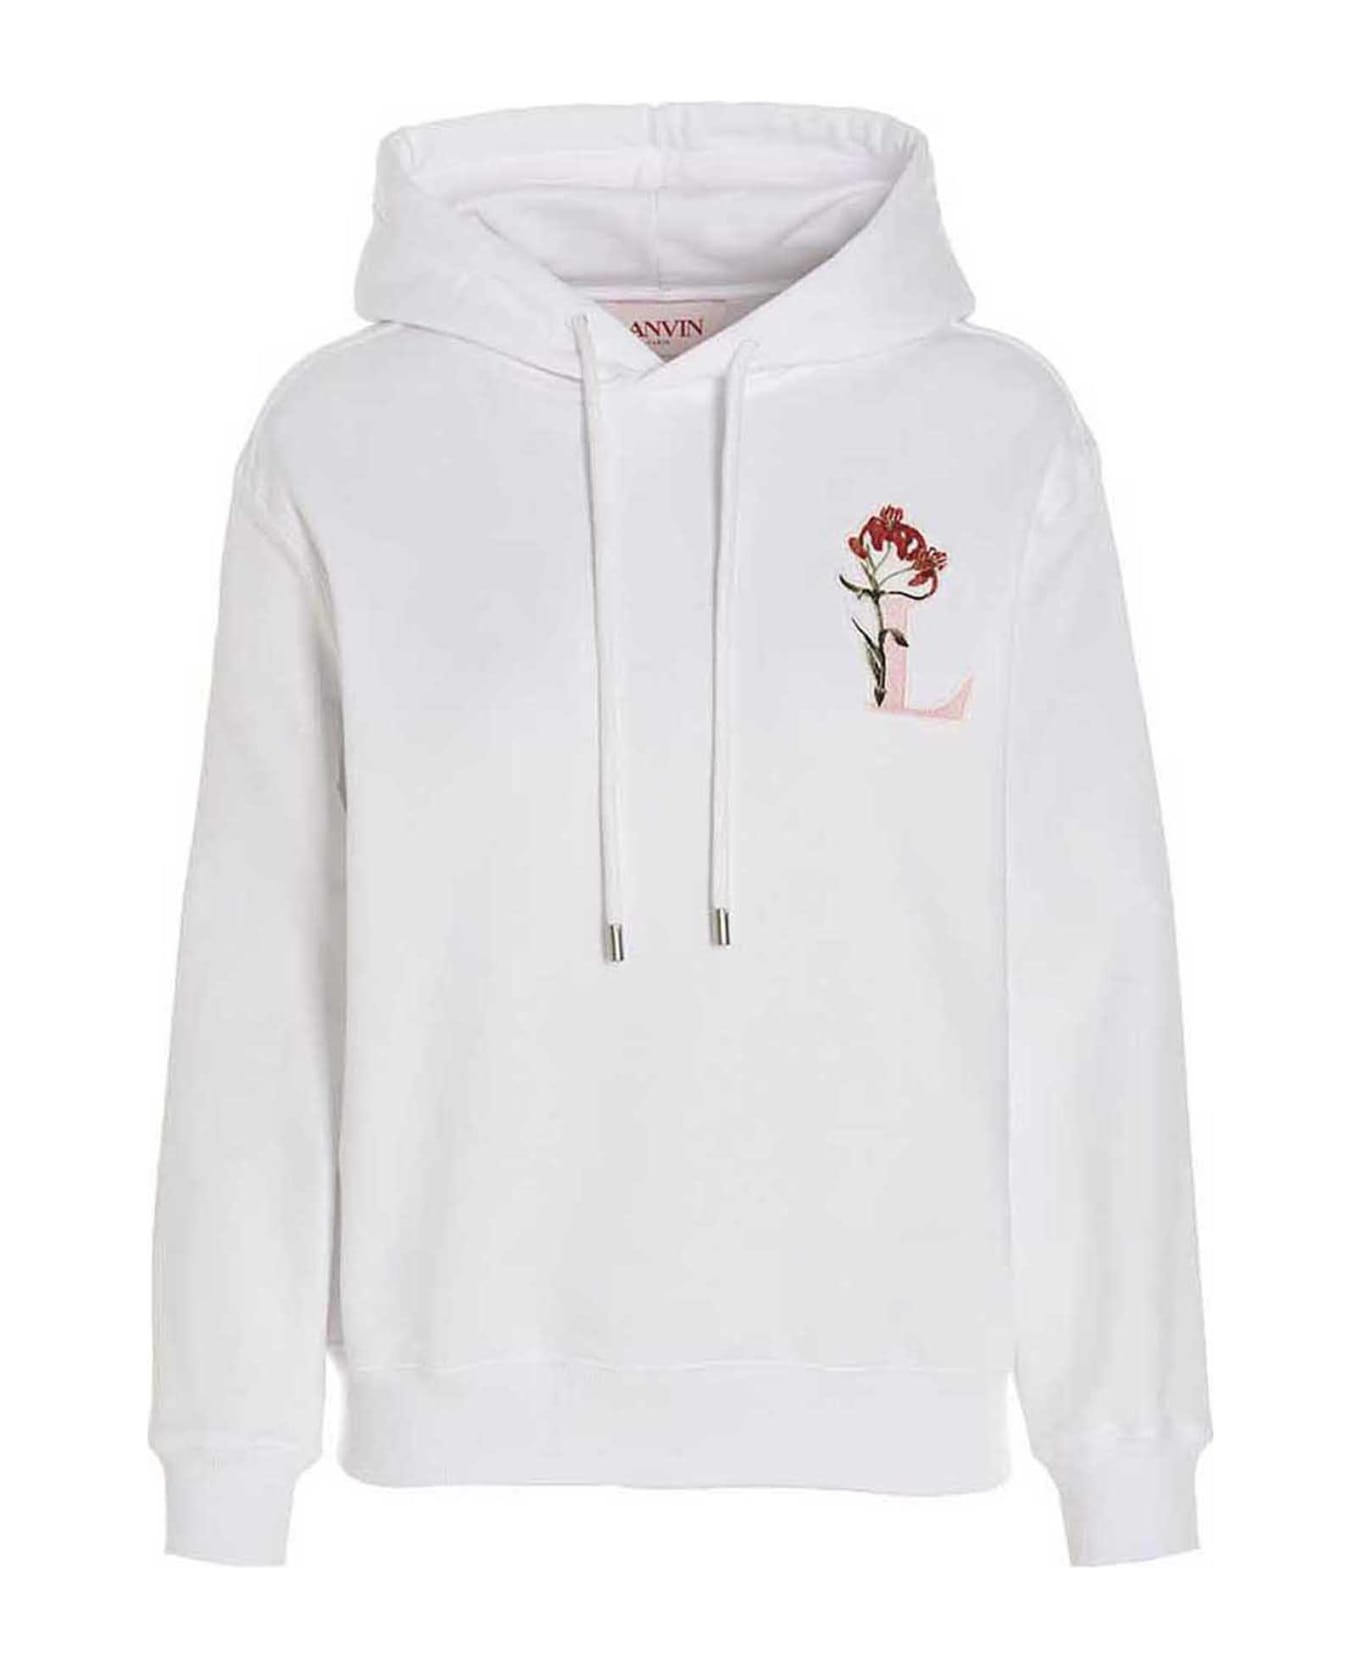 Lanvin Print Embroidery Hoodie - White